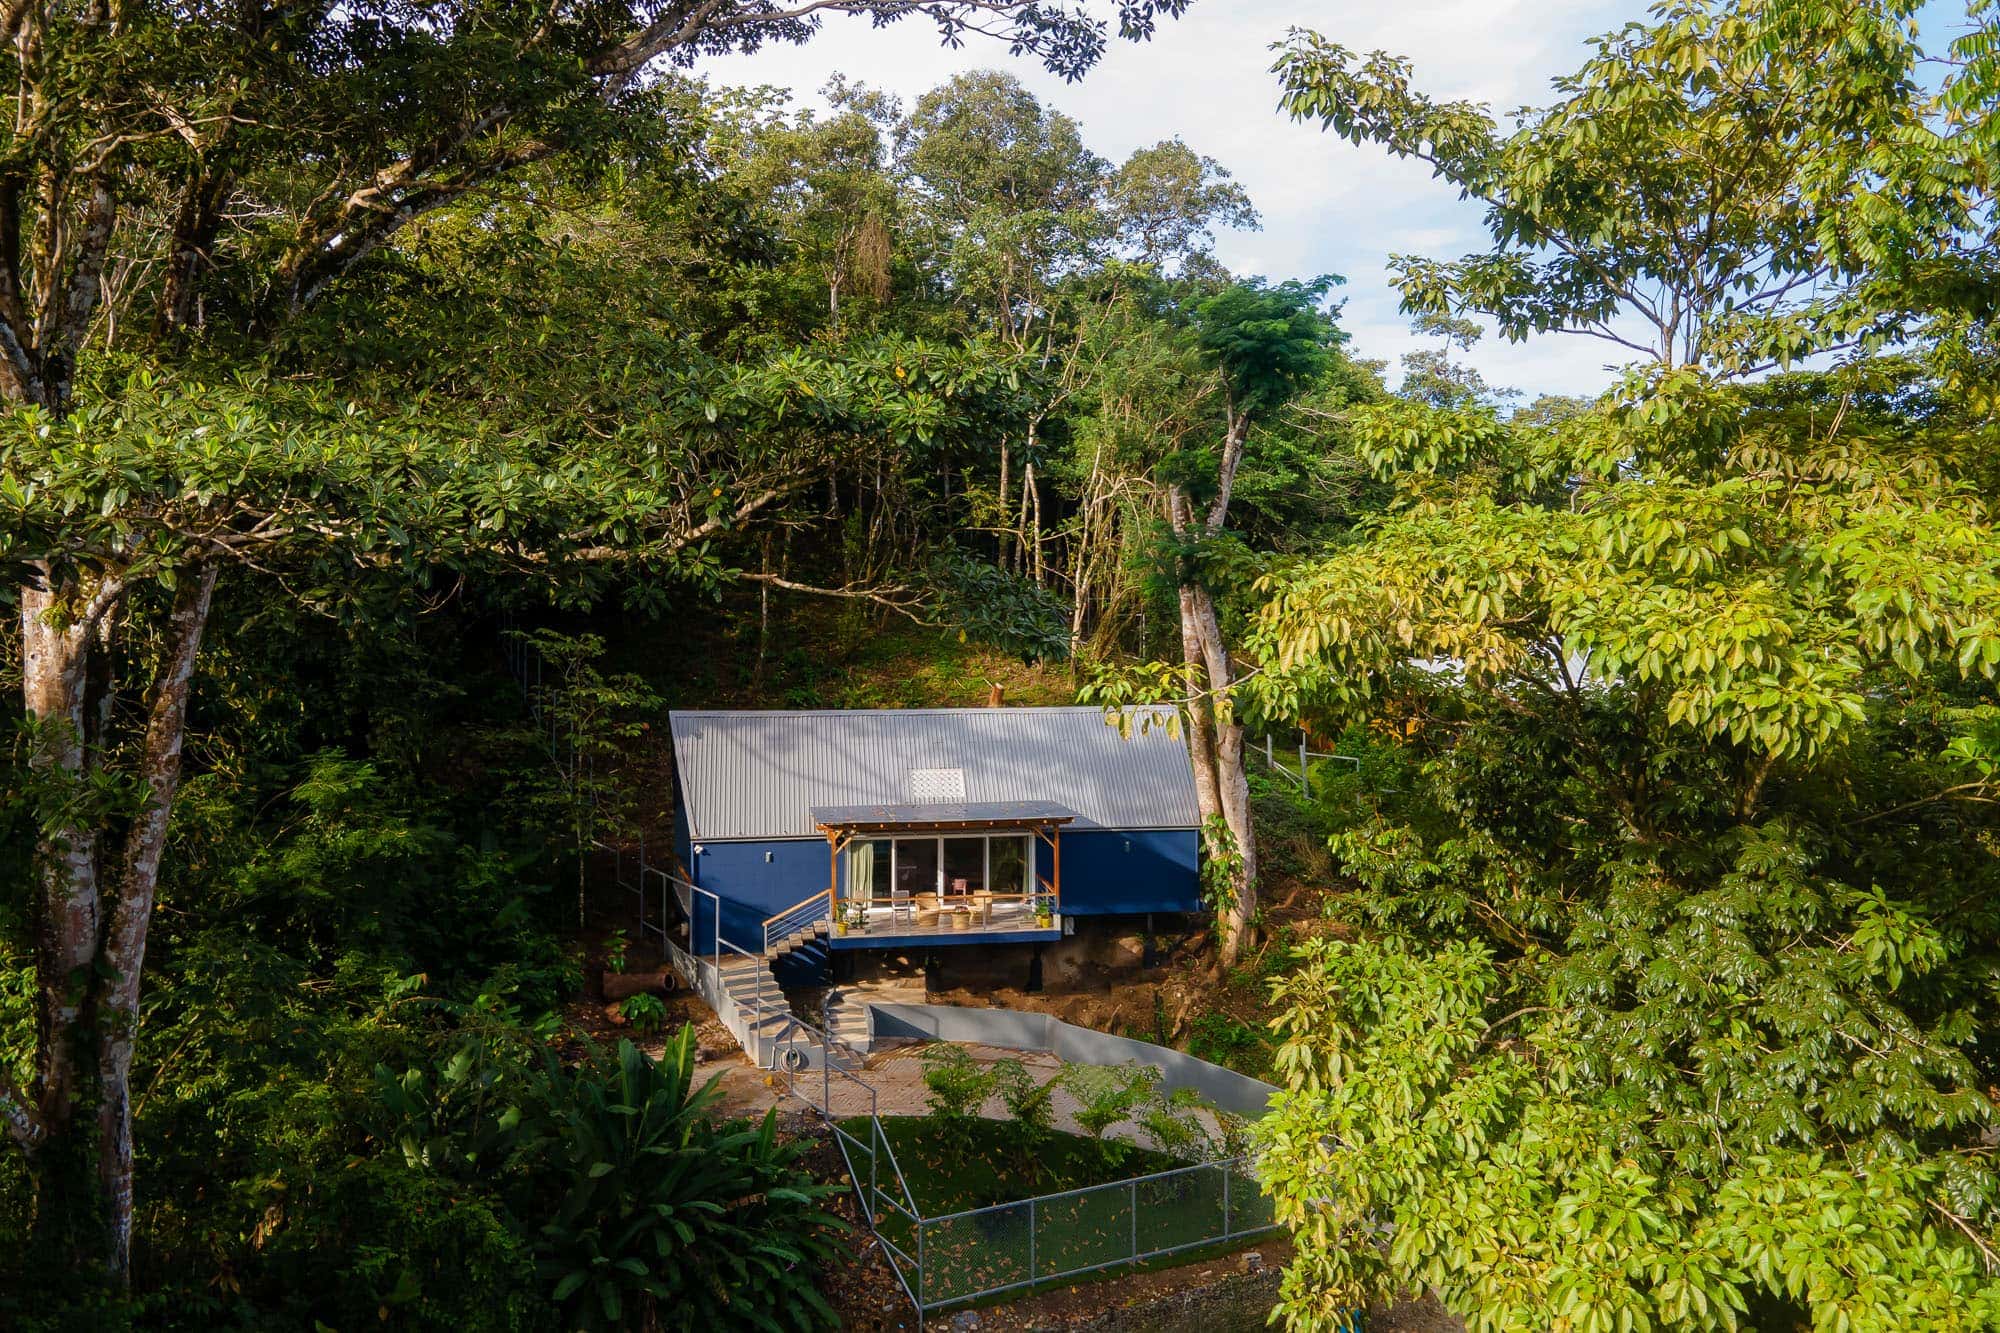 residential house in beach town in costa rica